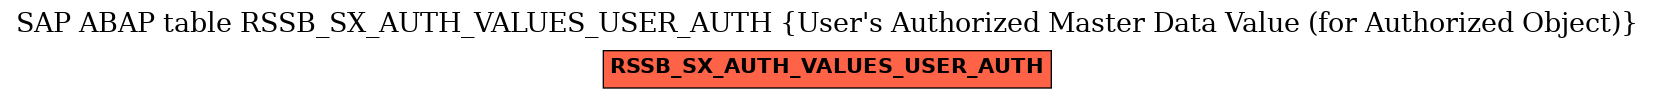 E-R Diagram for table RSSB_SX_AUTH_VALUES_USER_AUTH (User's Authorized Master Data Value (for Authorized Object))